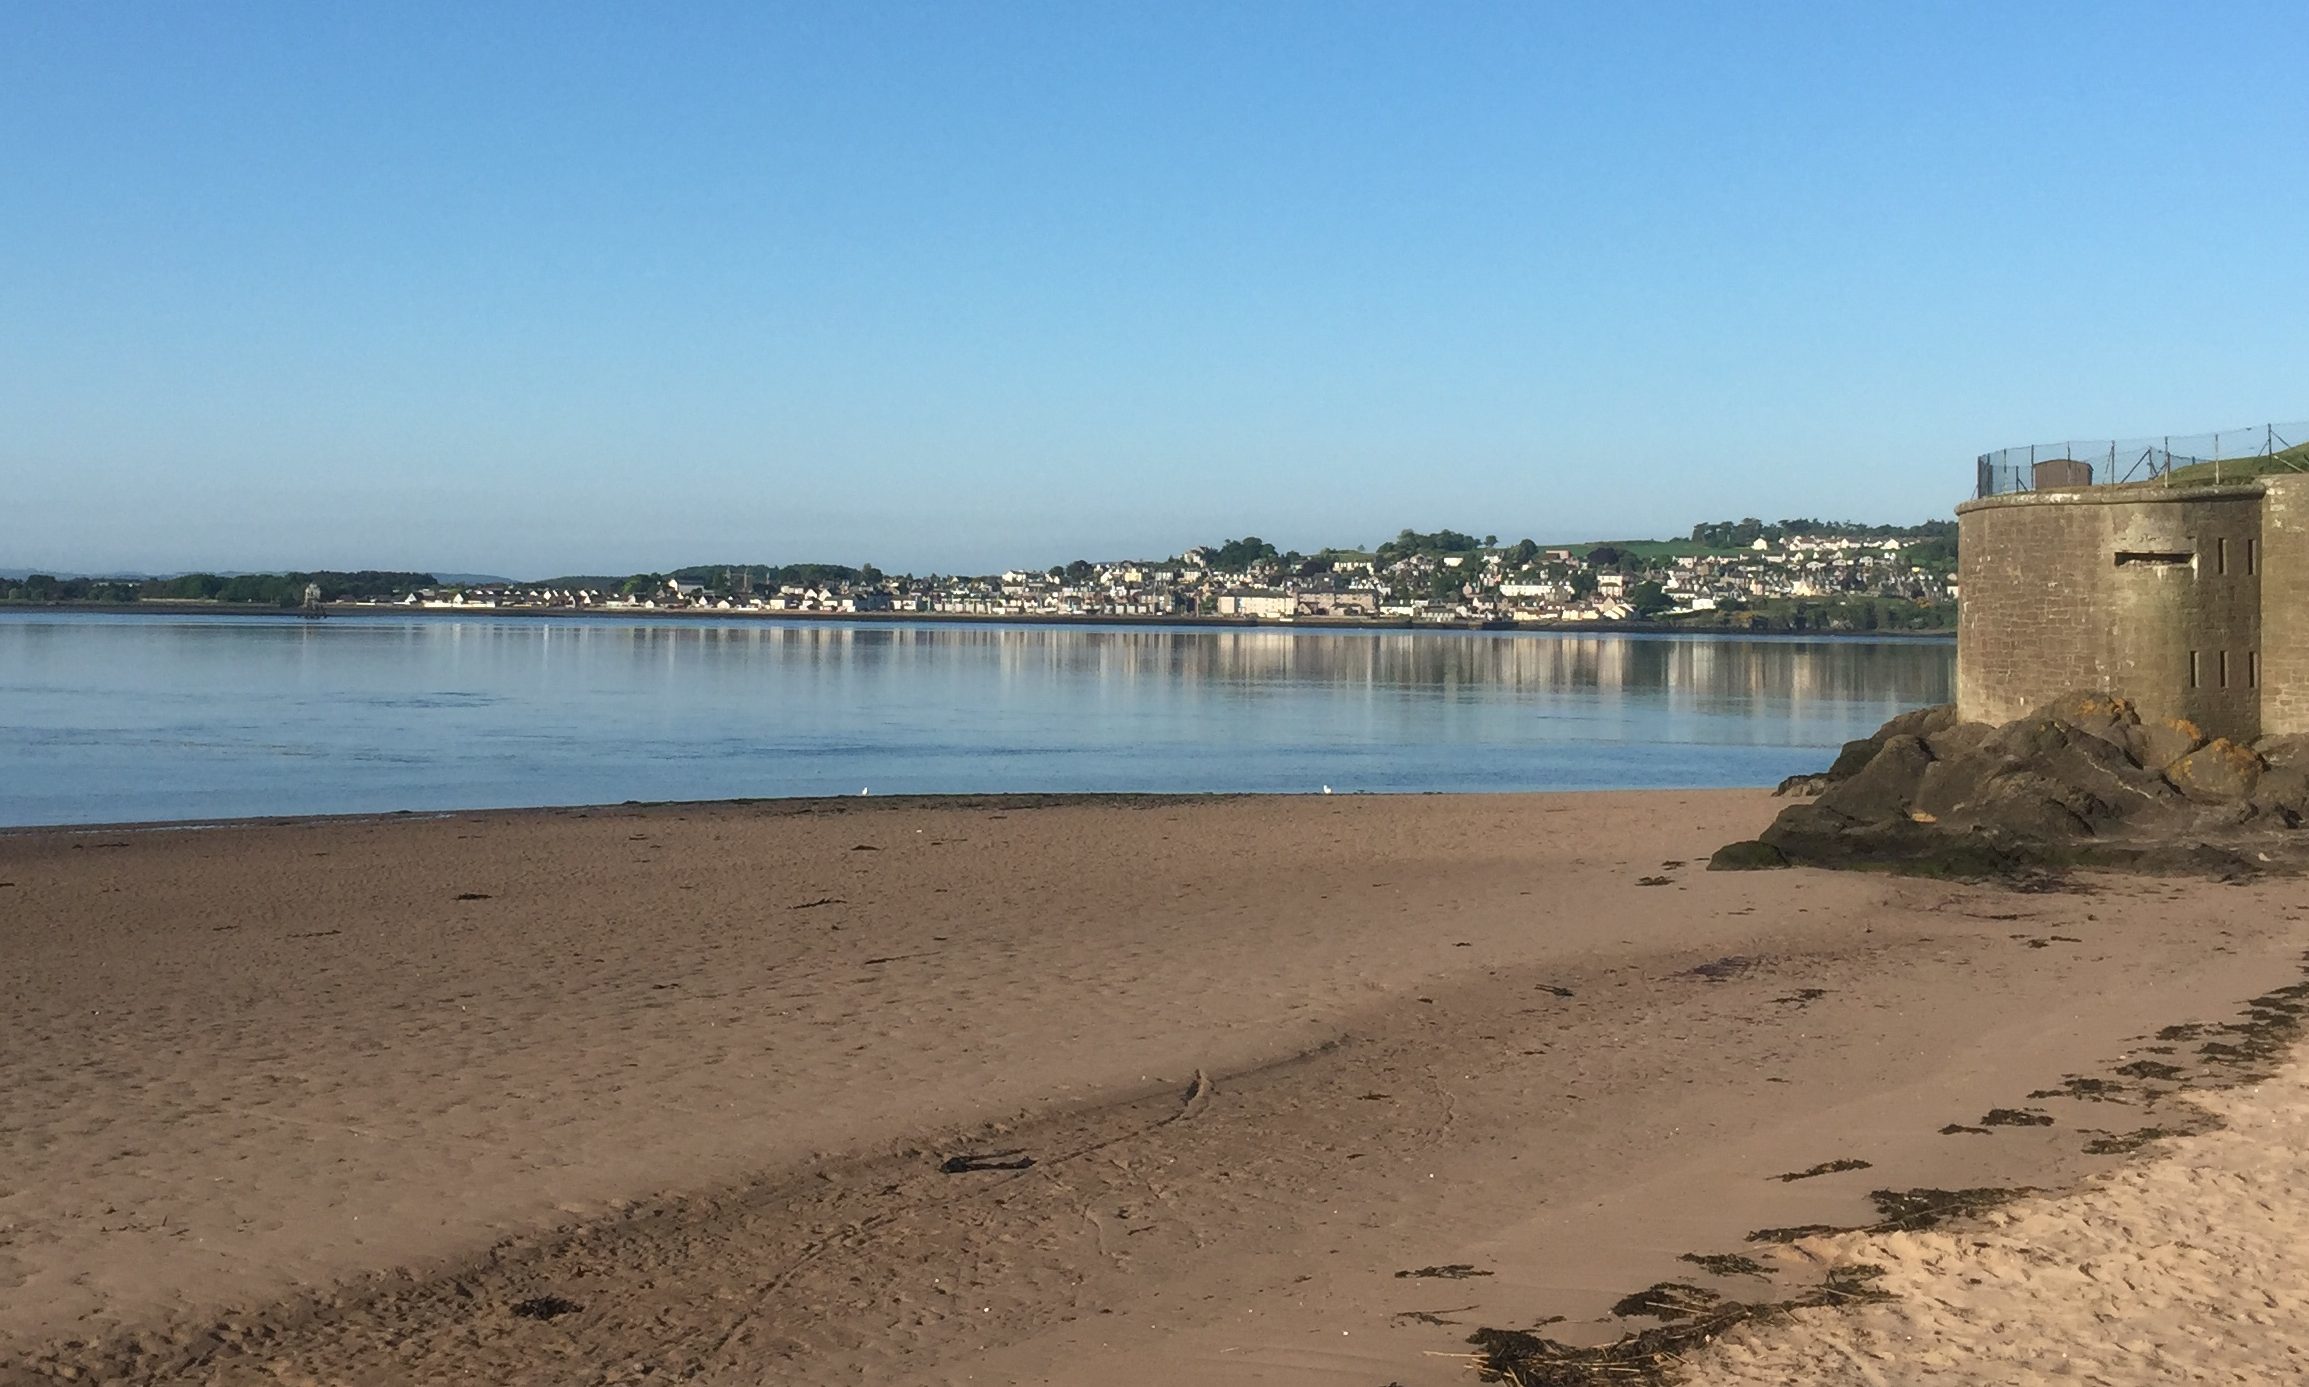 It was another sunny day in Broughty Ferry on Friday.